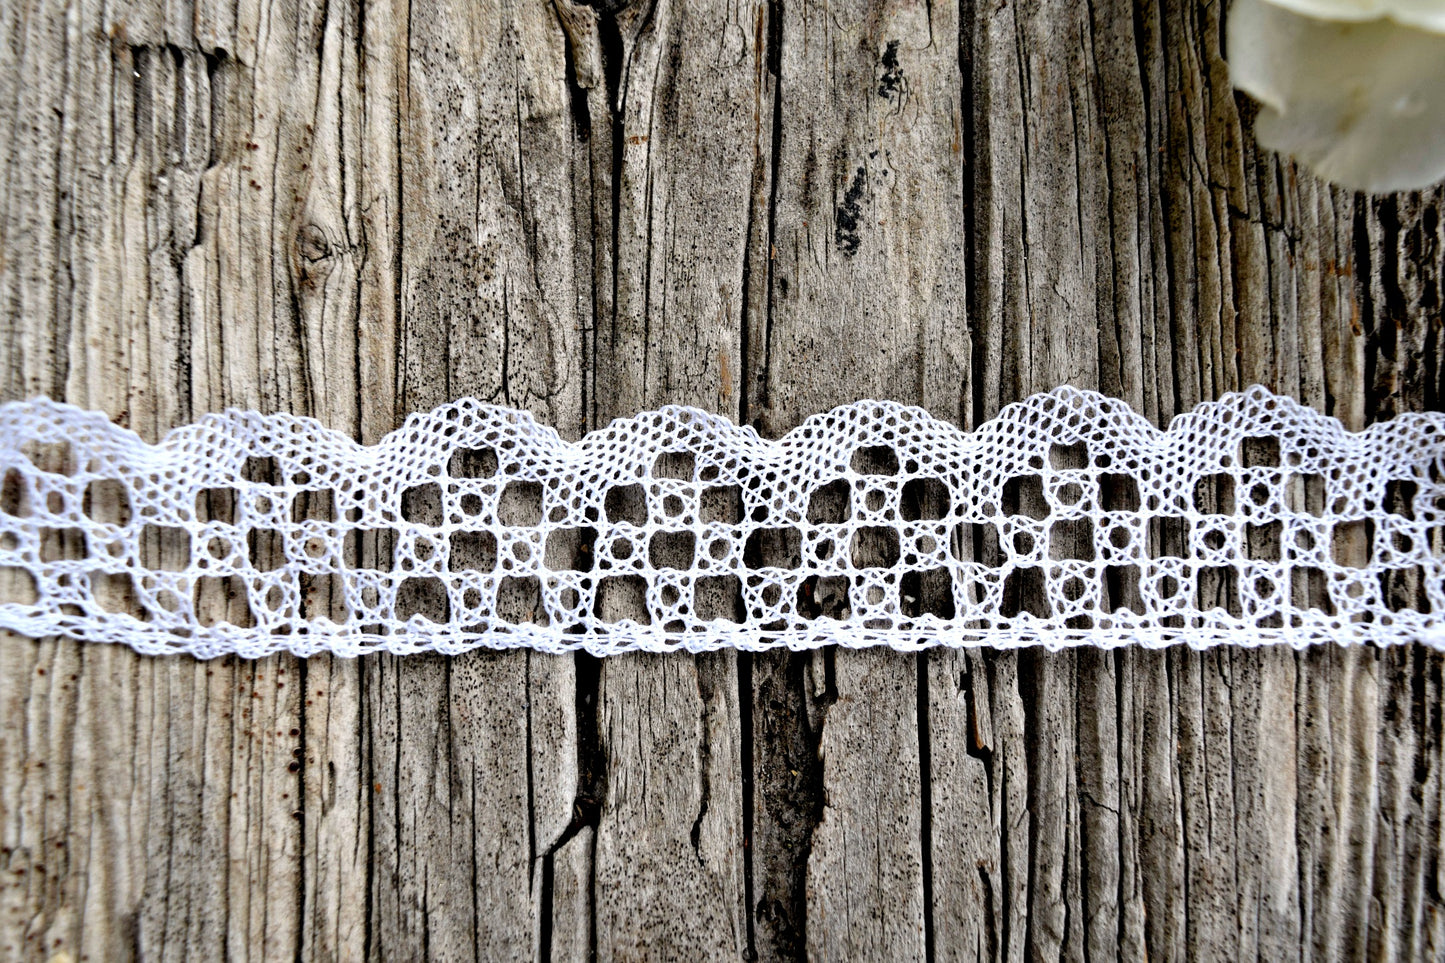 Handmade Bobbin Lace by the Foot - Rose Tiles